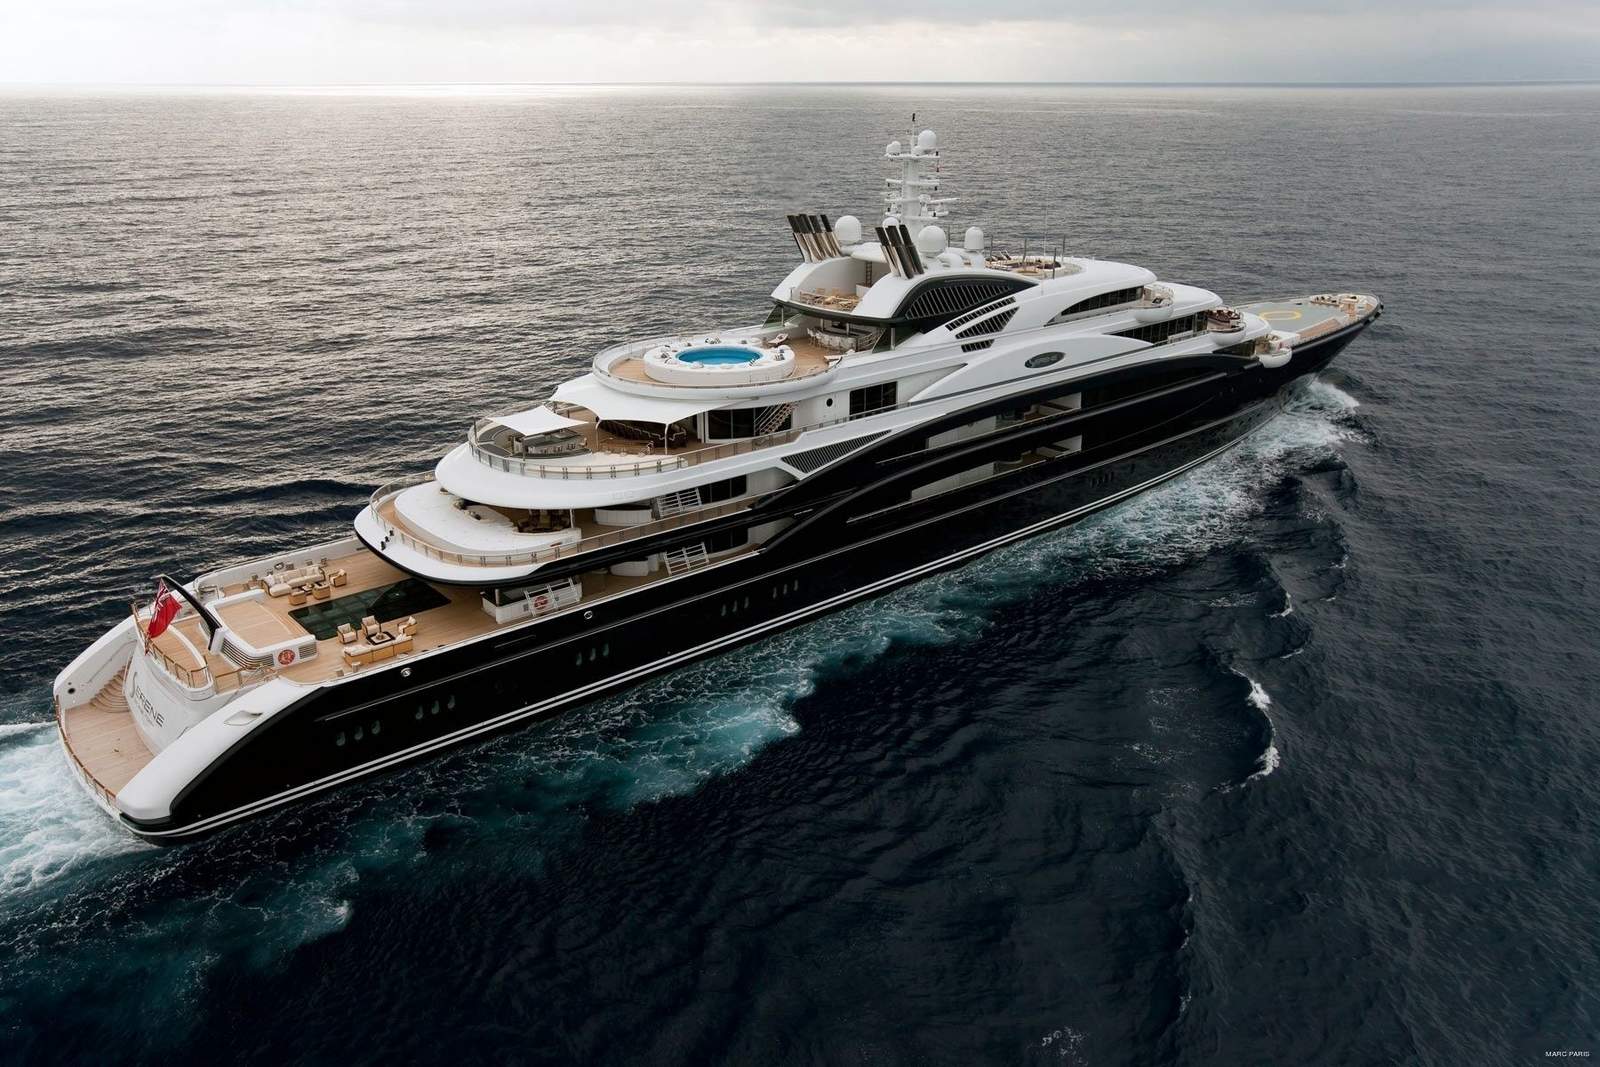 Saudi prince MBS bought this $400 million megayacht from a Russian Oligarch and immediately kicked him out. The 439 feet long vessel has two helipads, a submarine, and a nightclub. The royal has also hung a $450M painting in it.